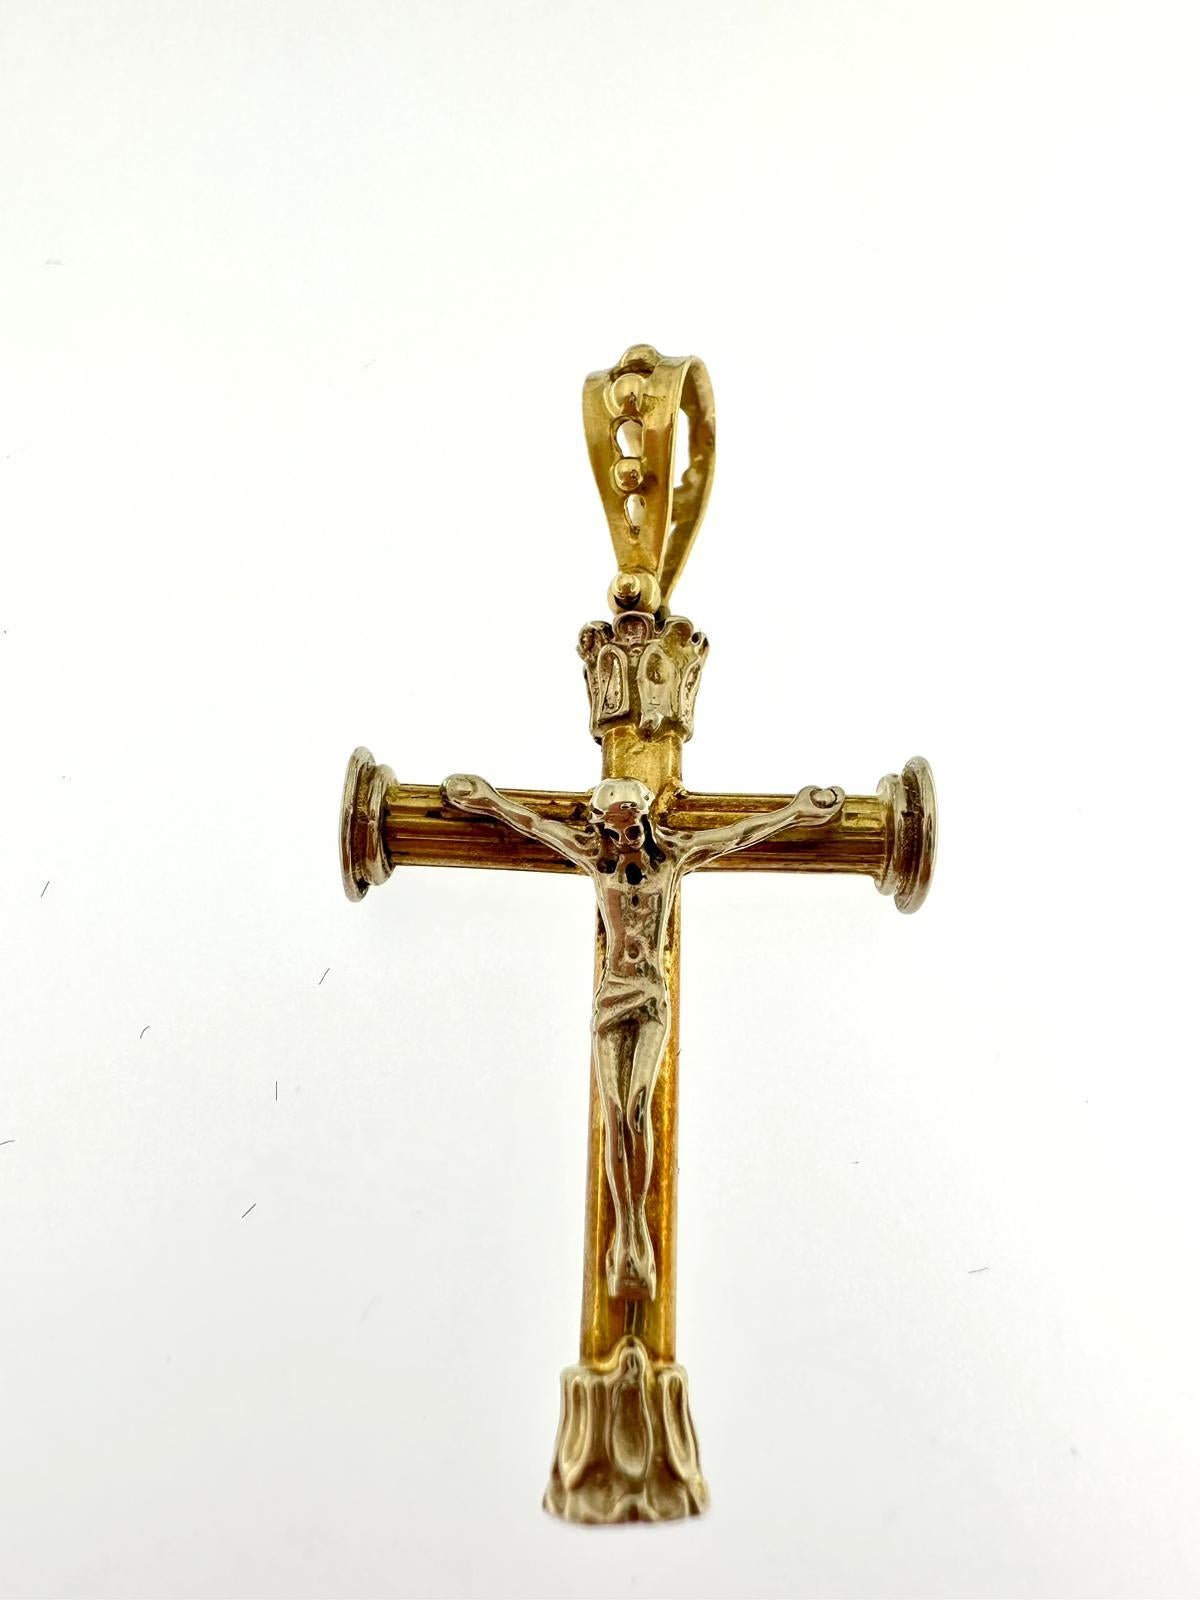 This modern crucifix was created in Vicenza, Italy by the goldsmith company 